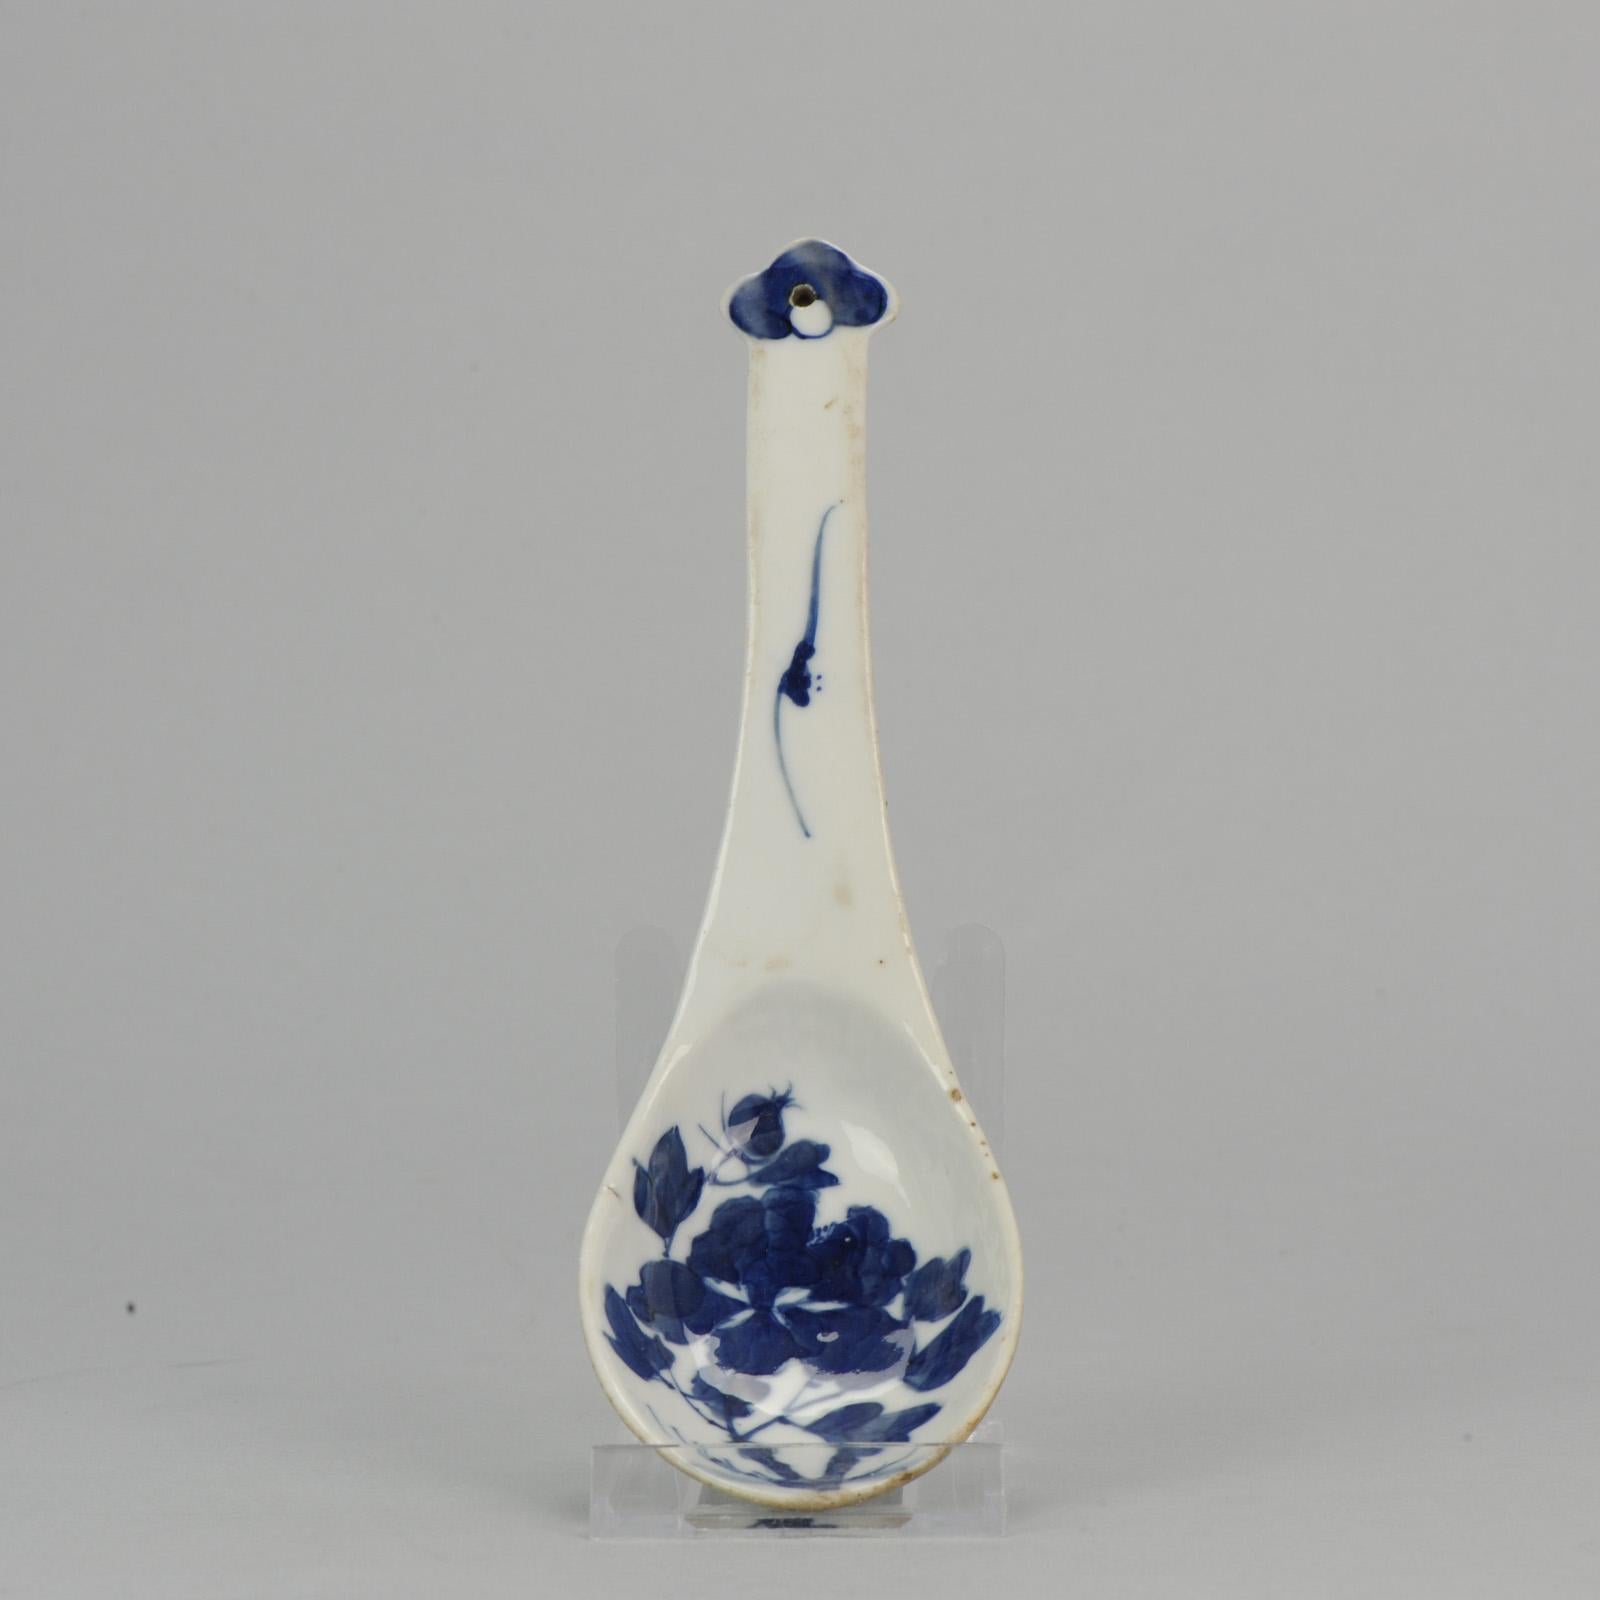 Very nice Spoon.Very nice Spoons. MArked Qianlong & Guangxu.

Additional information:
Material: Porcelain & Pottery
Type: Spoons
Color: Blue & White
Region of Origin: China
Period: 19th century, 20th century Qing (1661 - 1912), Republic / Minguo